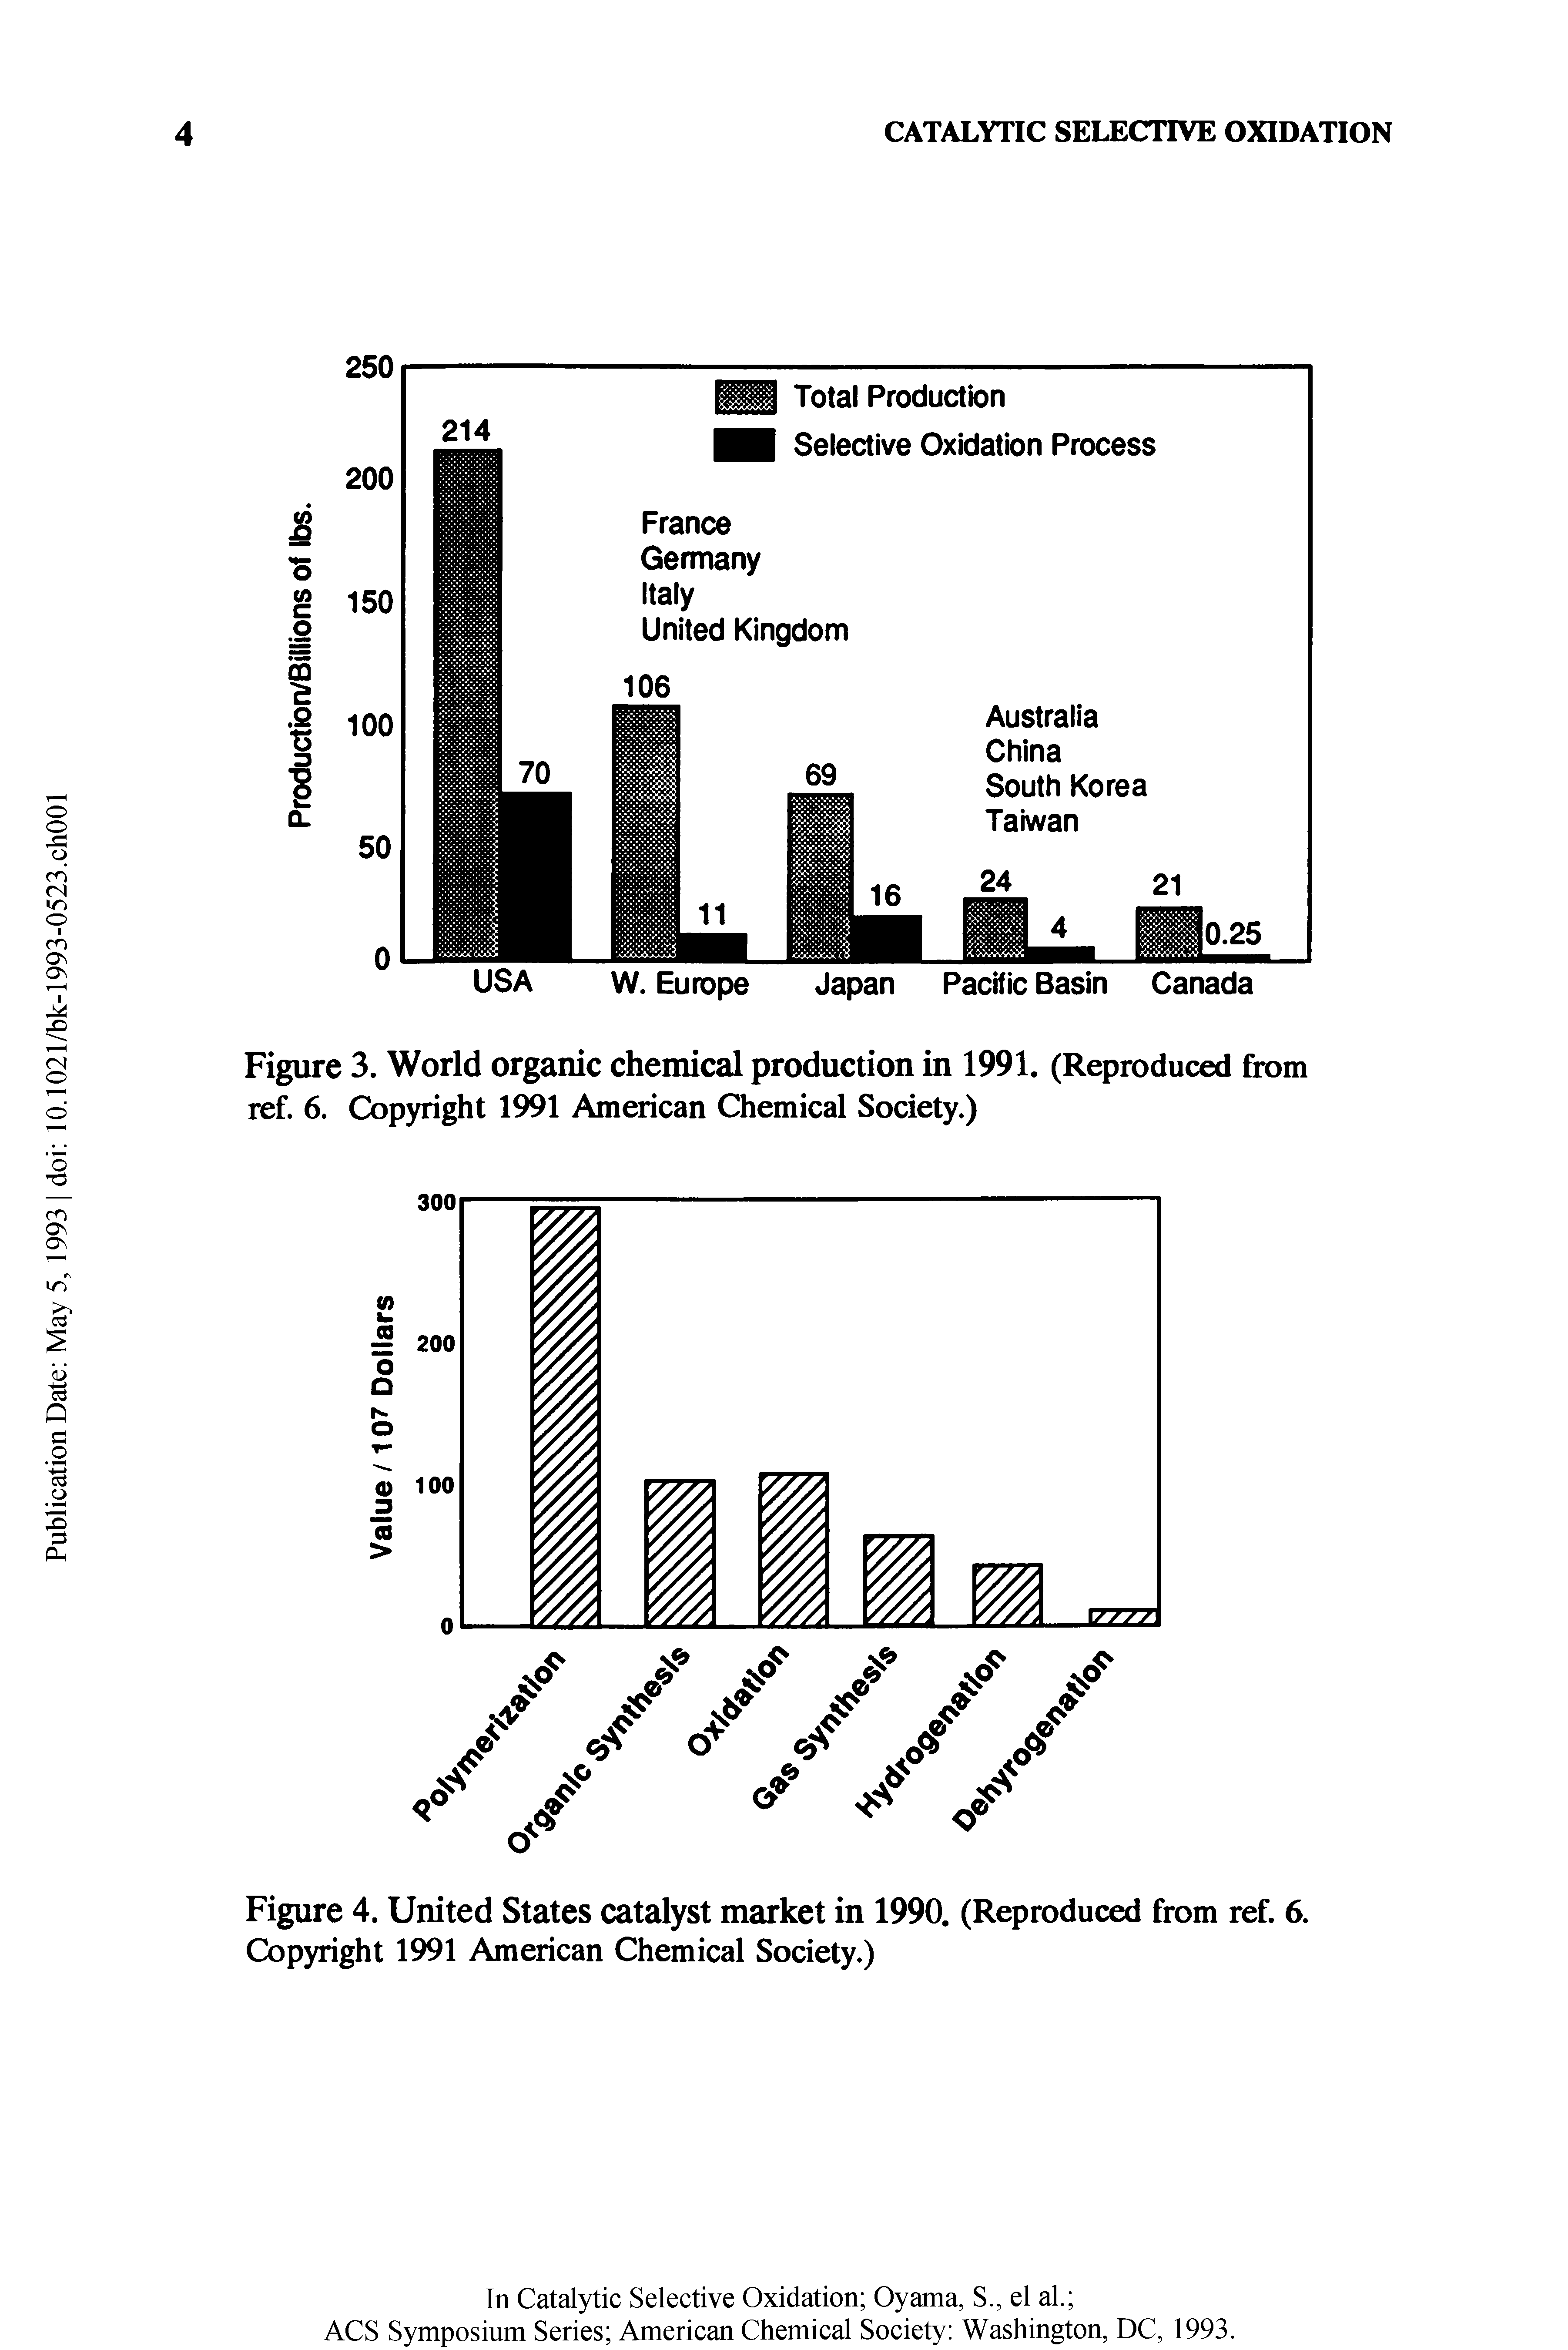 Figure 4. United States catalyst market in 1990. (Reproduced from ref. 6. Copyright 1991 American Chemical Society.)...